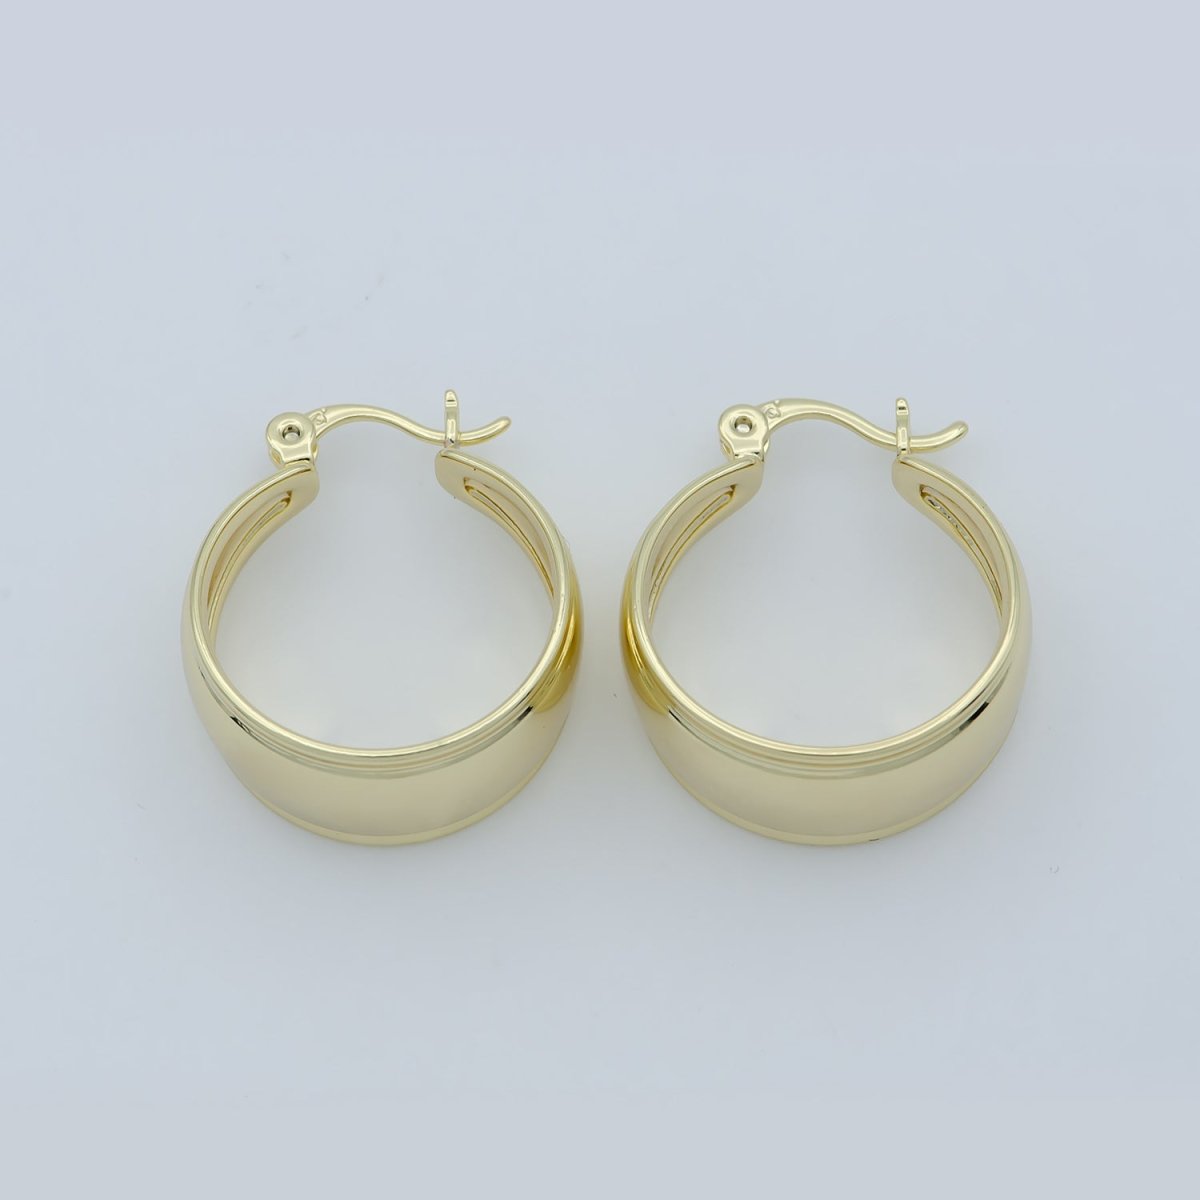 Golden Simple Round Huggies Earrings, Plain Gold Filled Geometric Formal/Casual Daily Wear Earring Jewelry P-256 - DLUXCA